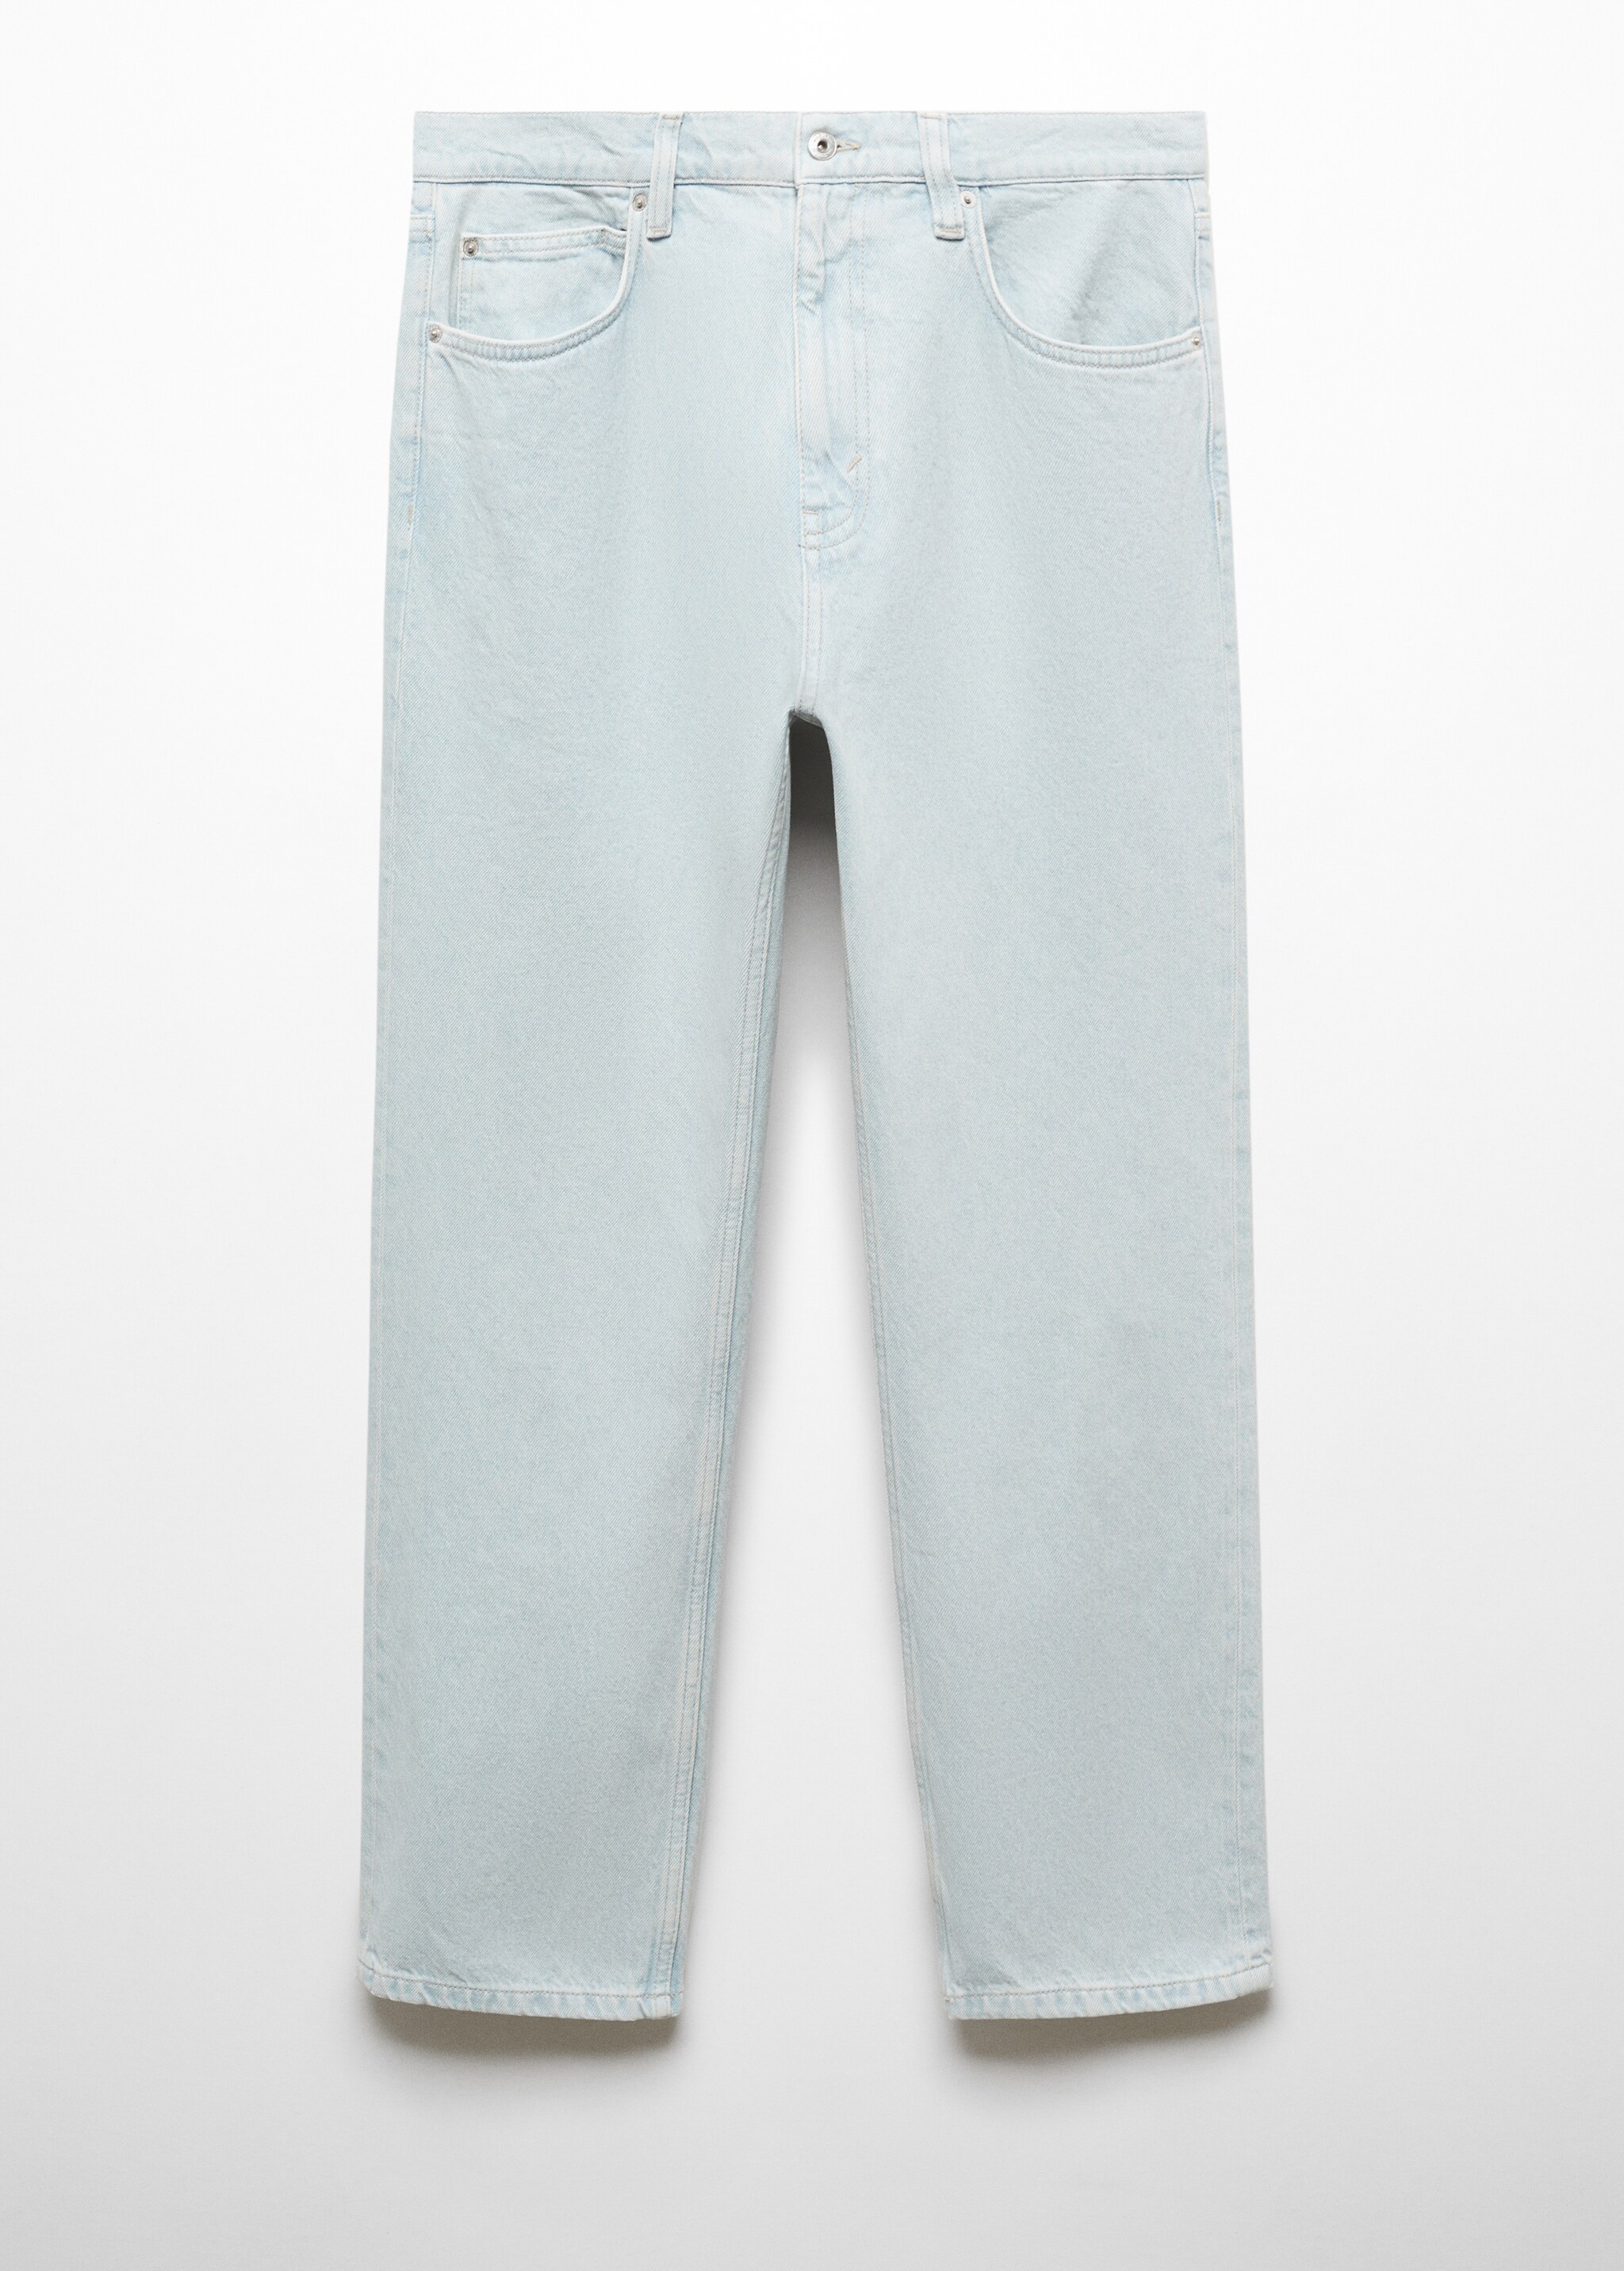 Relaxed fit washed effect jeans - Article without model